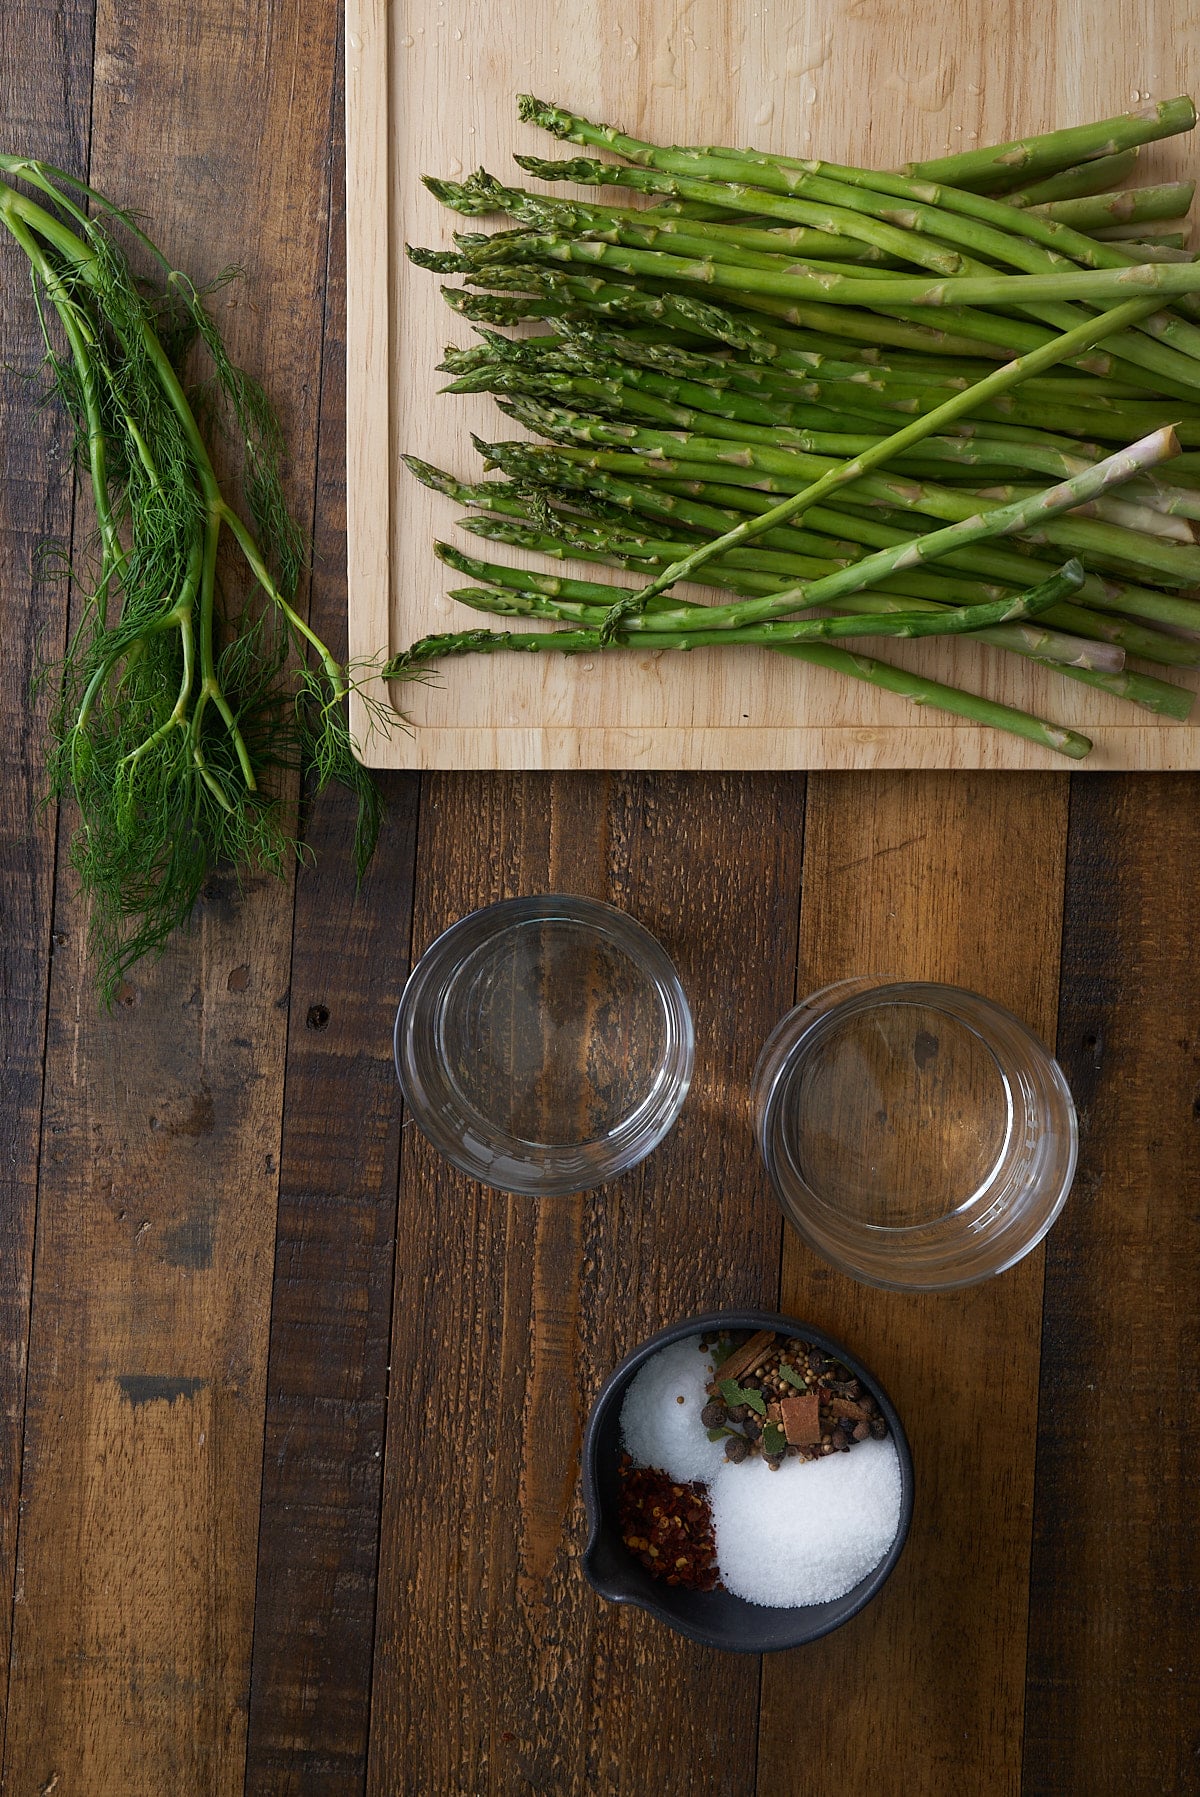 Pickled asparagus recipe ingredients including asparagus spears set on a wooden board, fresh sprigs of dill, water, vinegar and a bowl with pickling spices, salt and sugar.